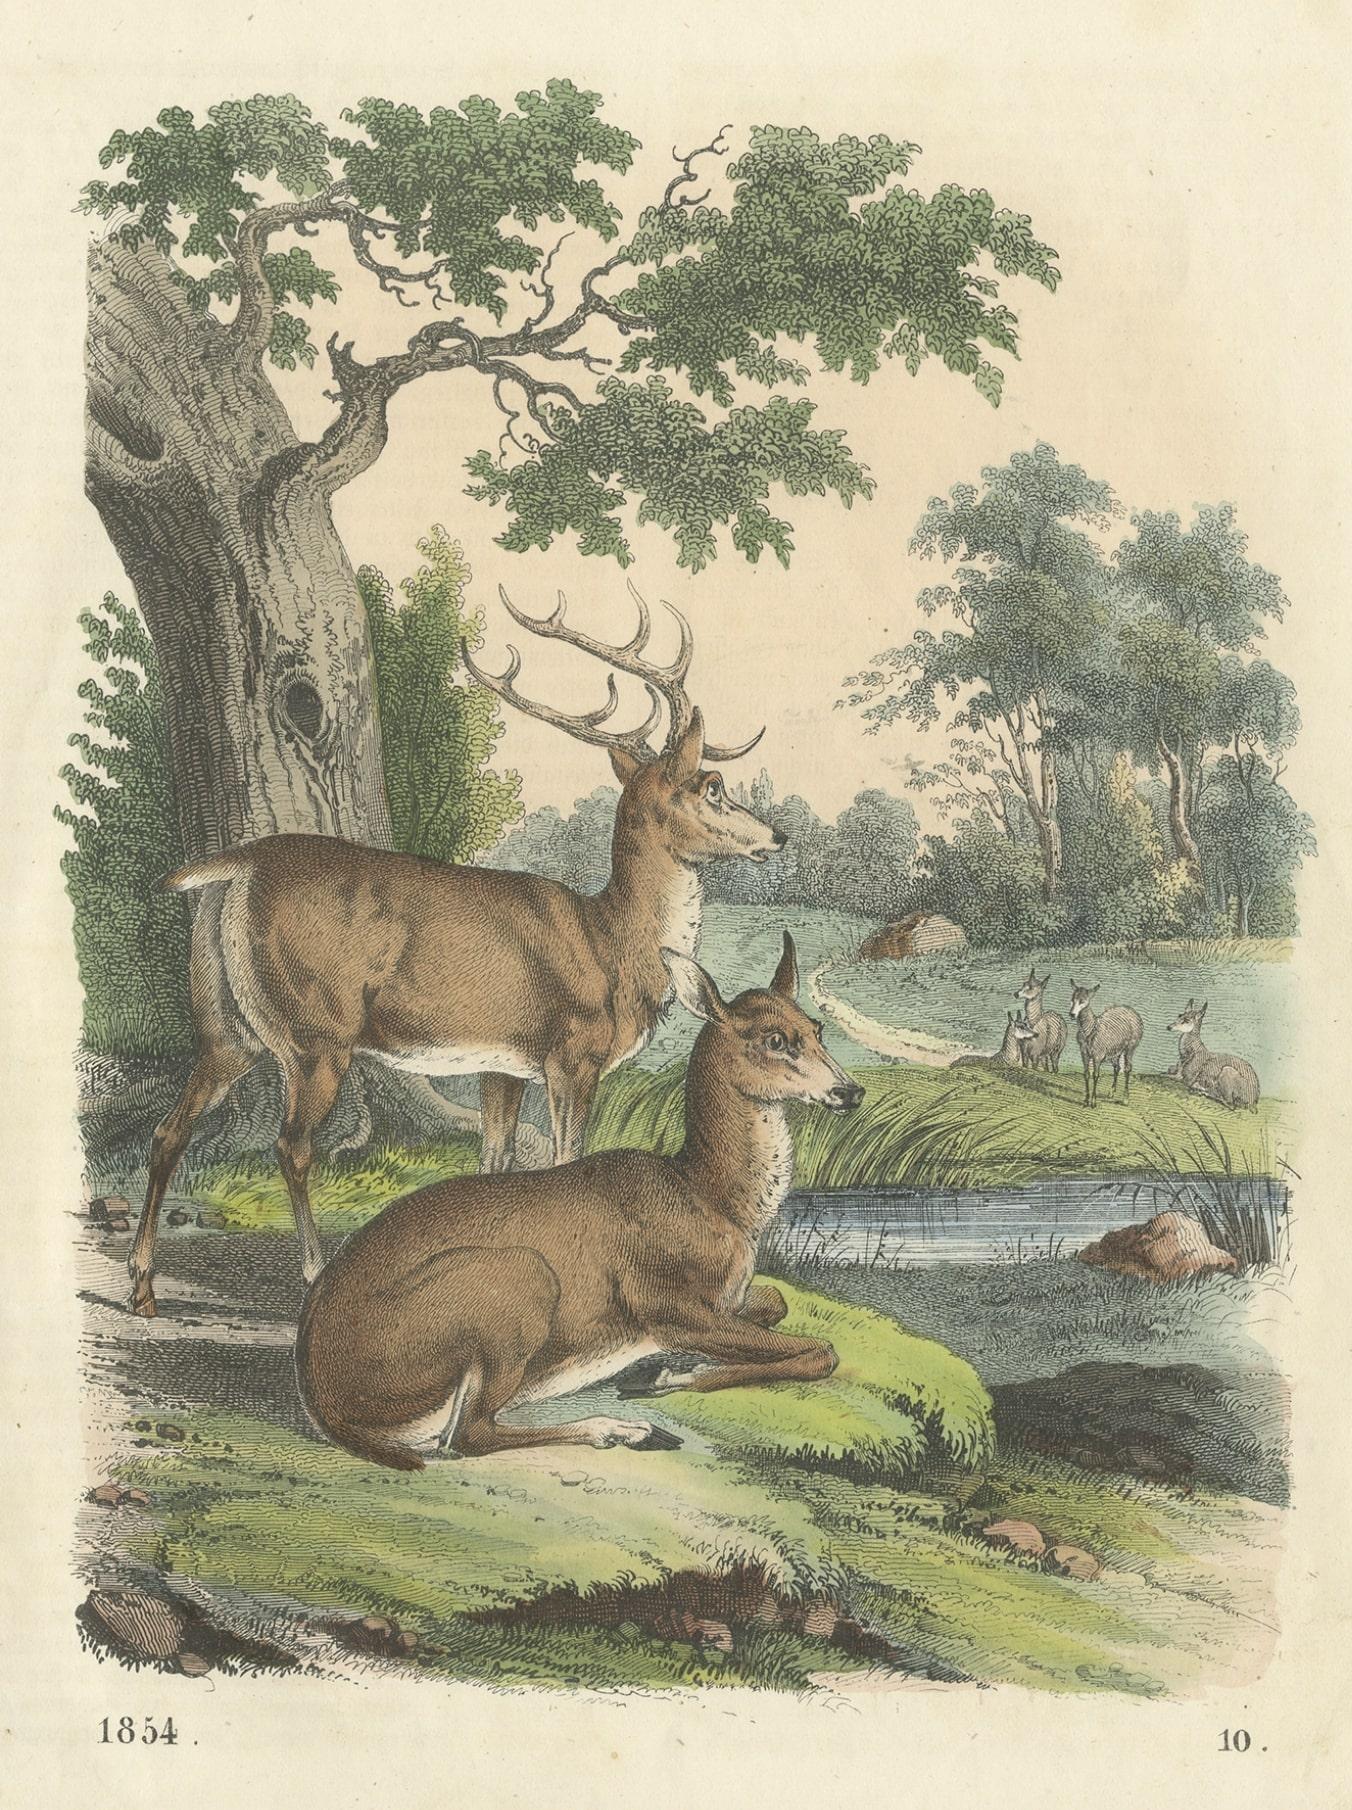 Paper Antique Print of a Male and Female Deer, 1854